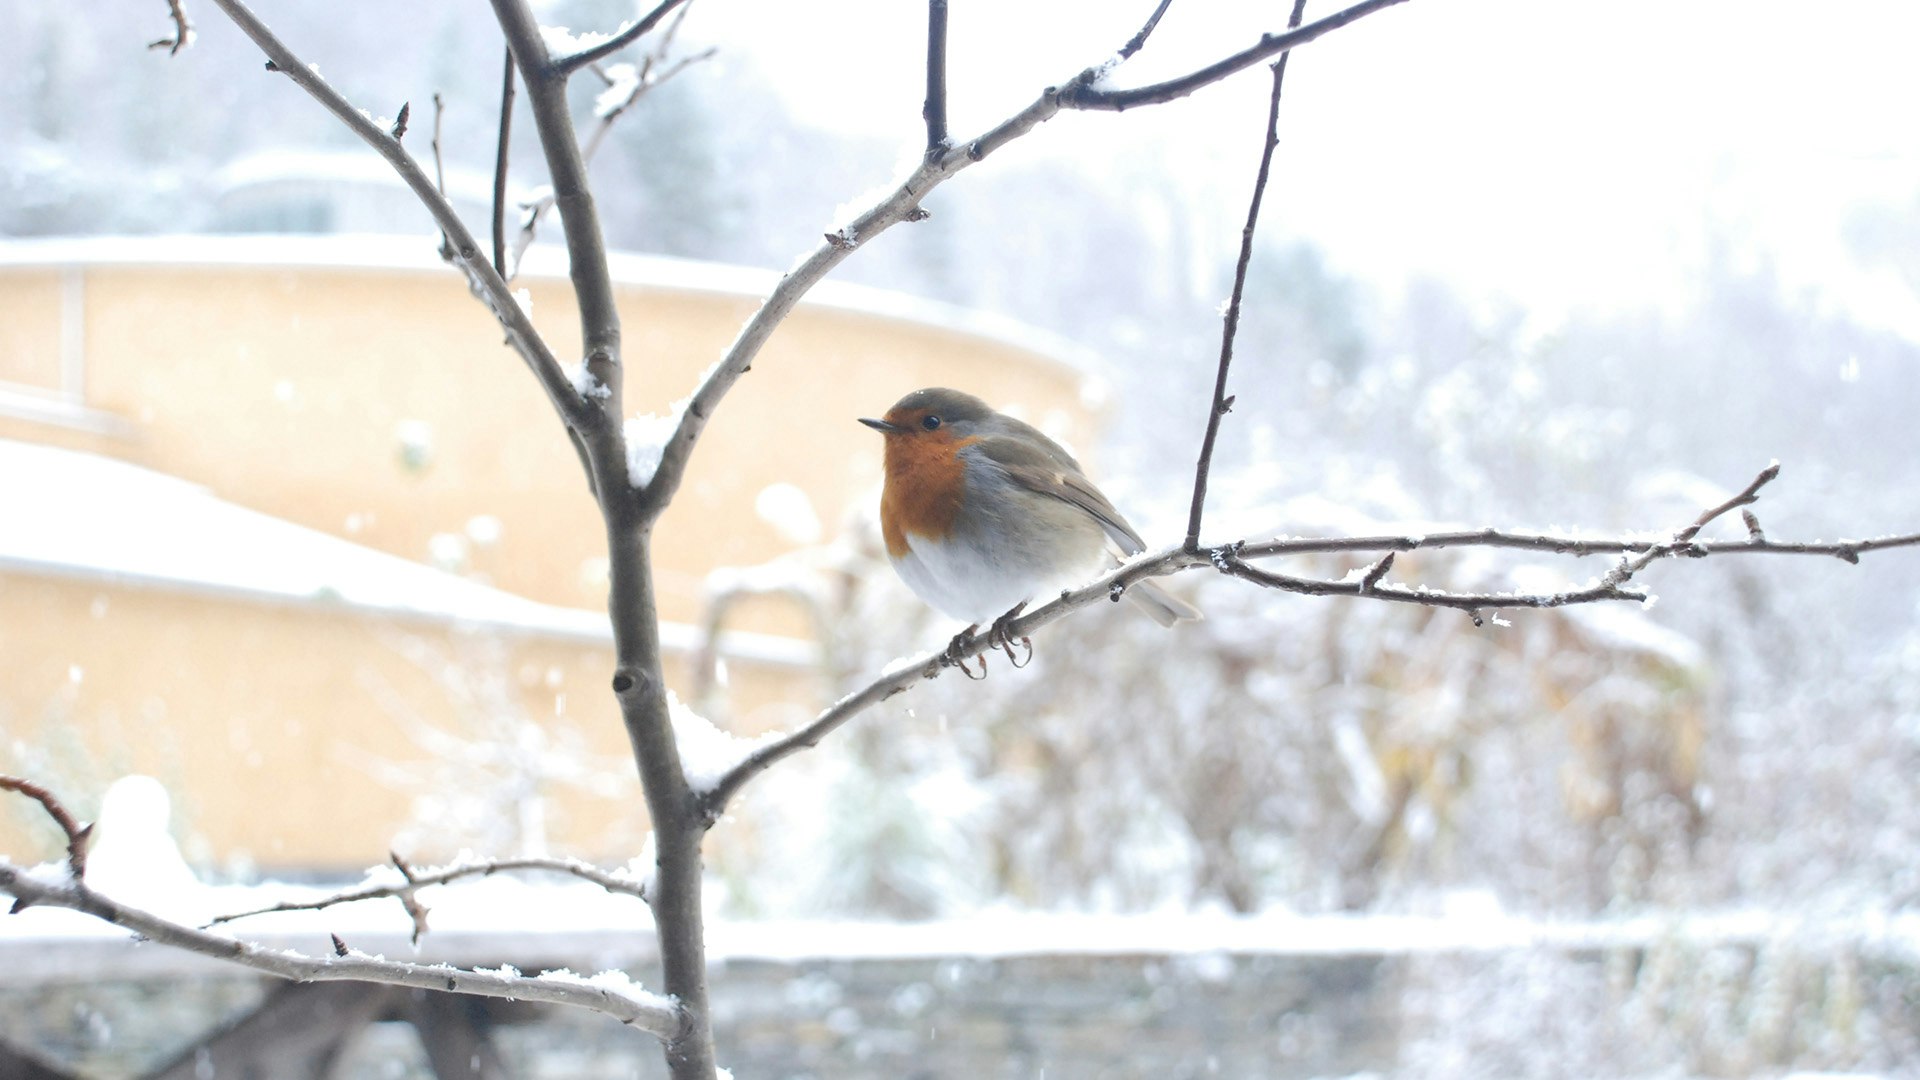 Robin at CAT in the snow